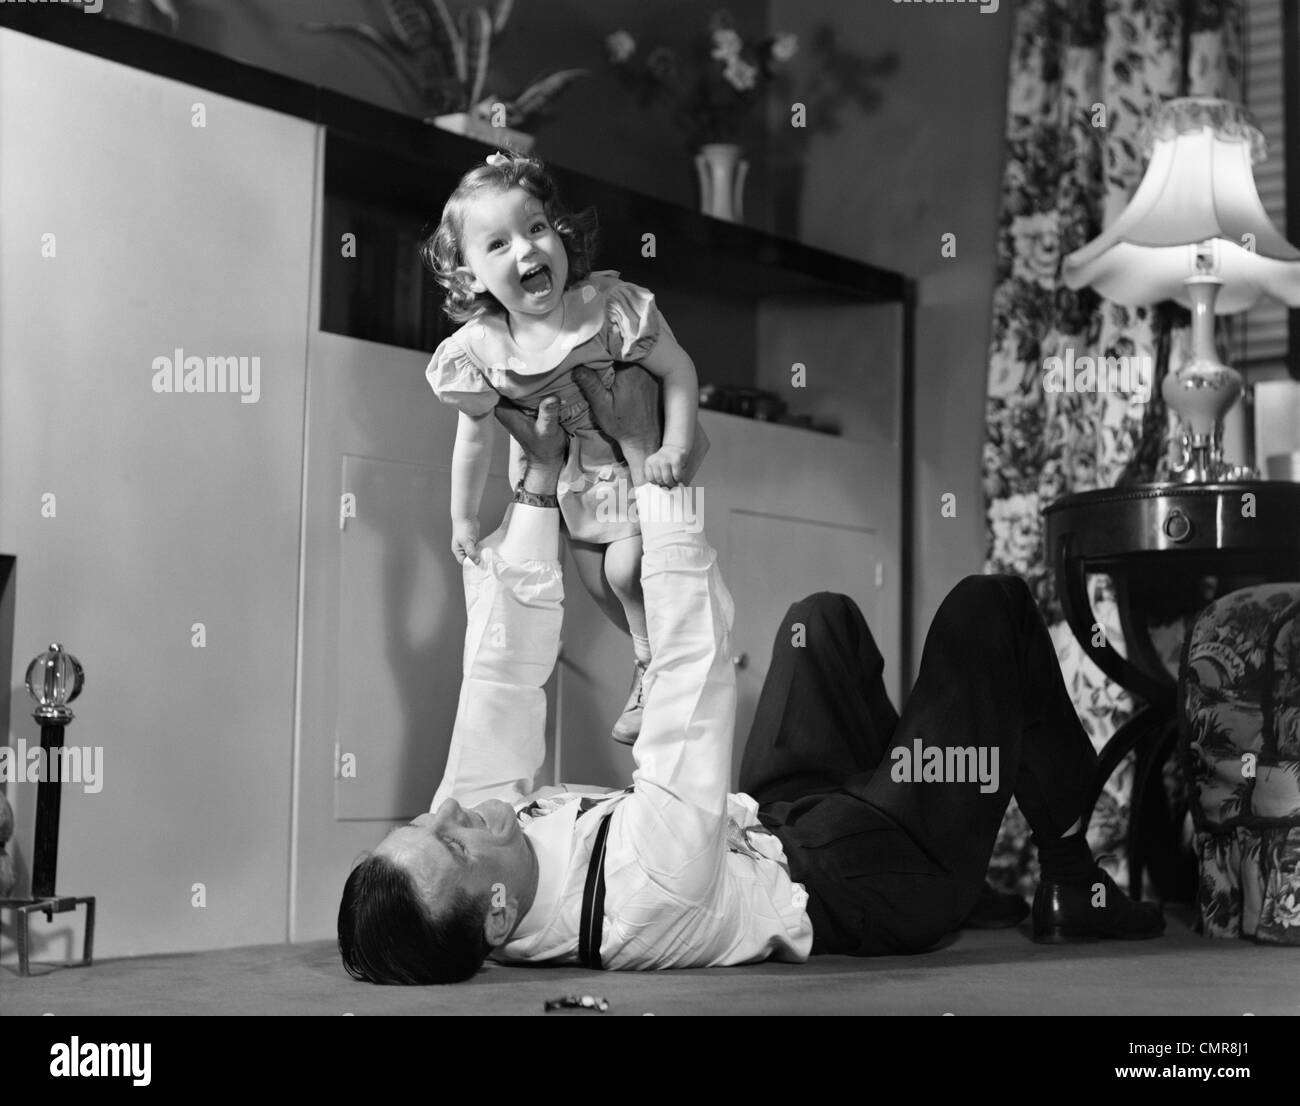 1950s FATHER LYING FLOOR HOLDING DAUGHTER GIRL UP IN THE AIR Stock Photo